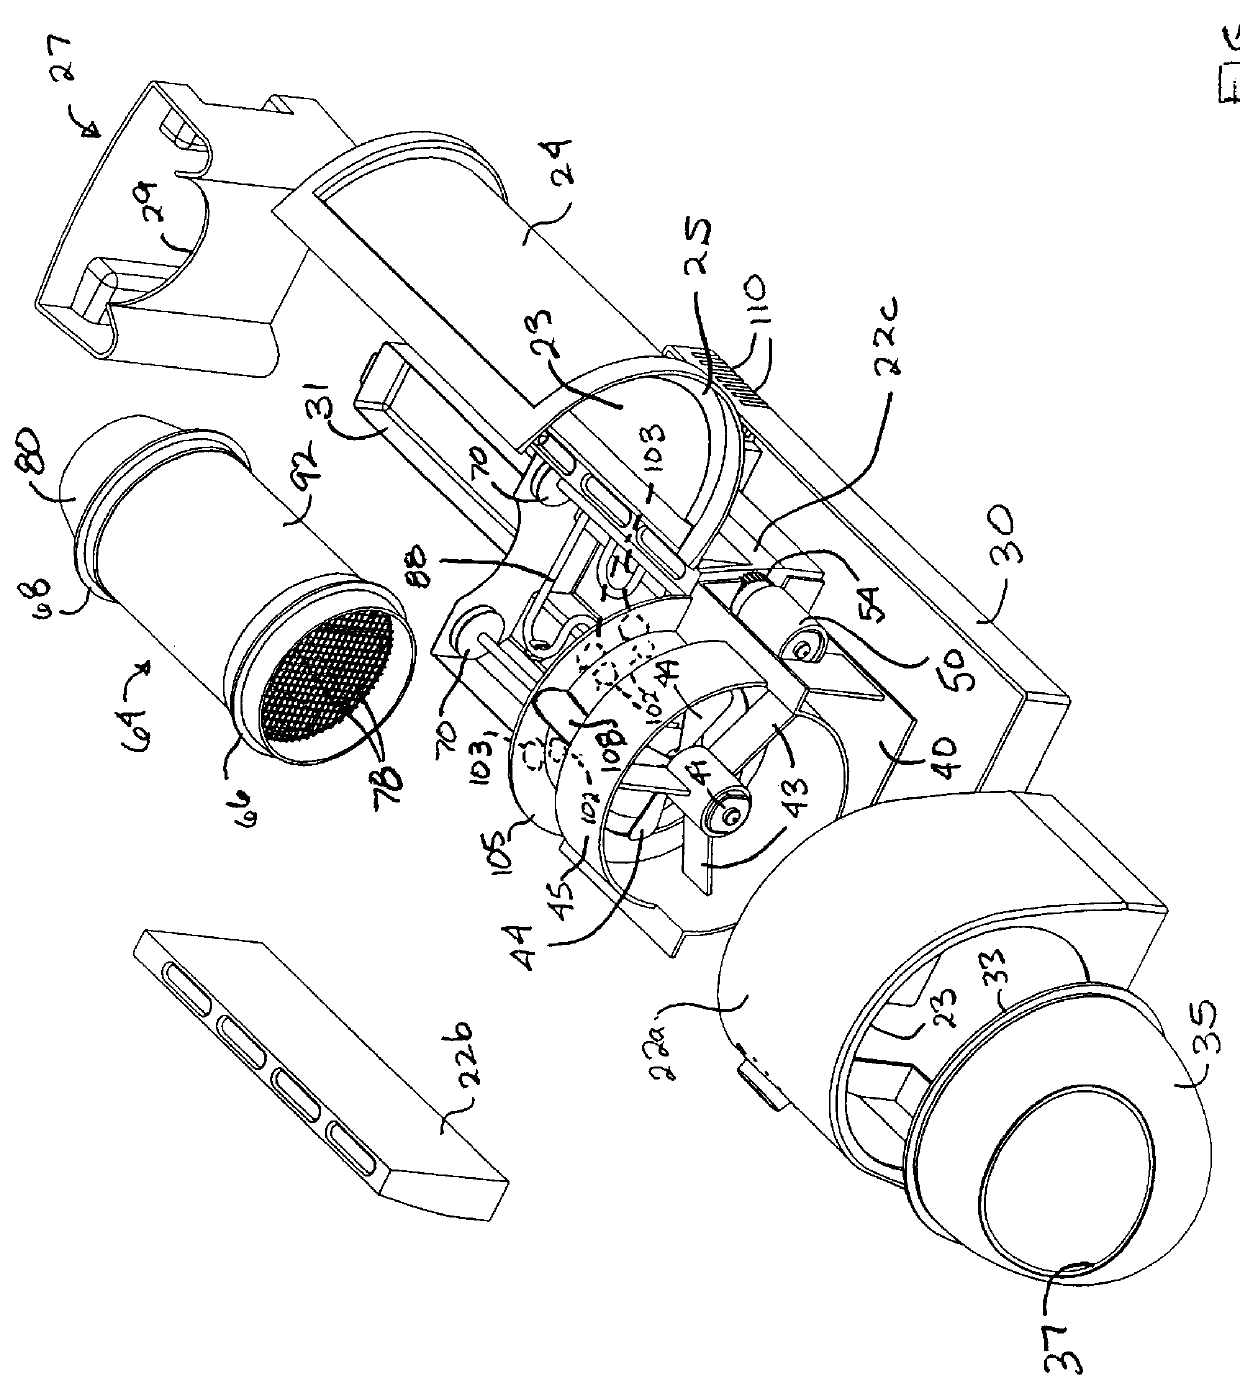 Method and apparatus for roasting coffee beans